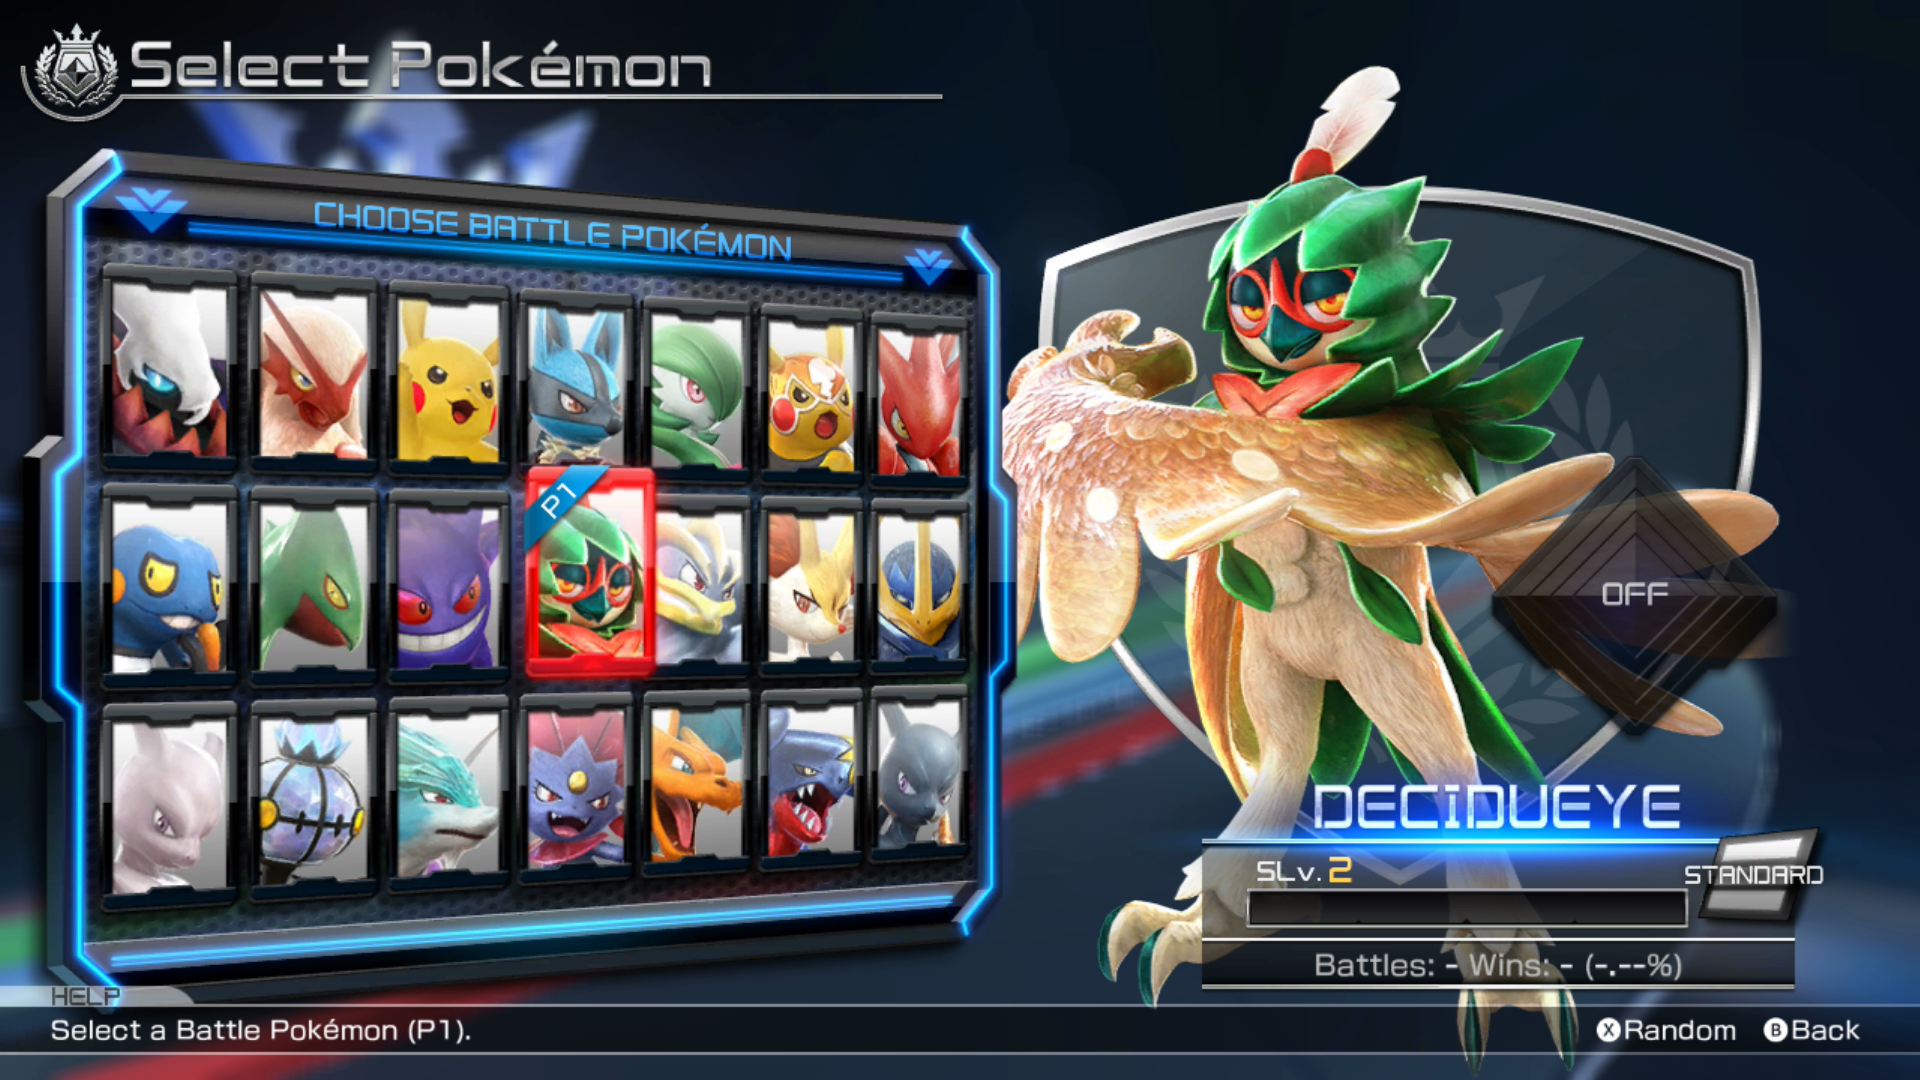 Pokken Tournament Is Way Better On A Console That Isn’t Dead